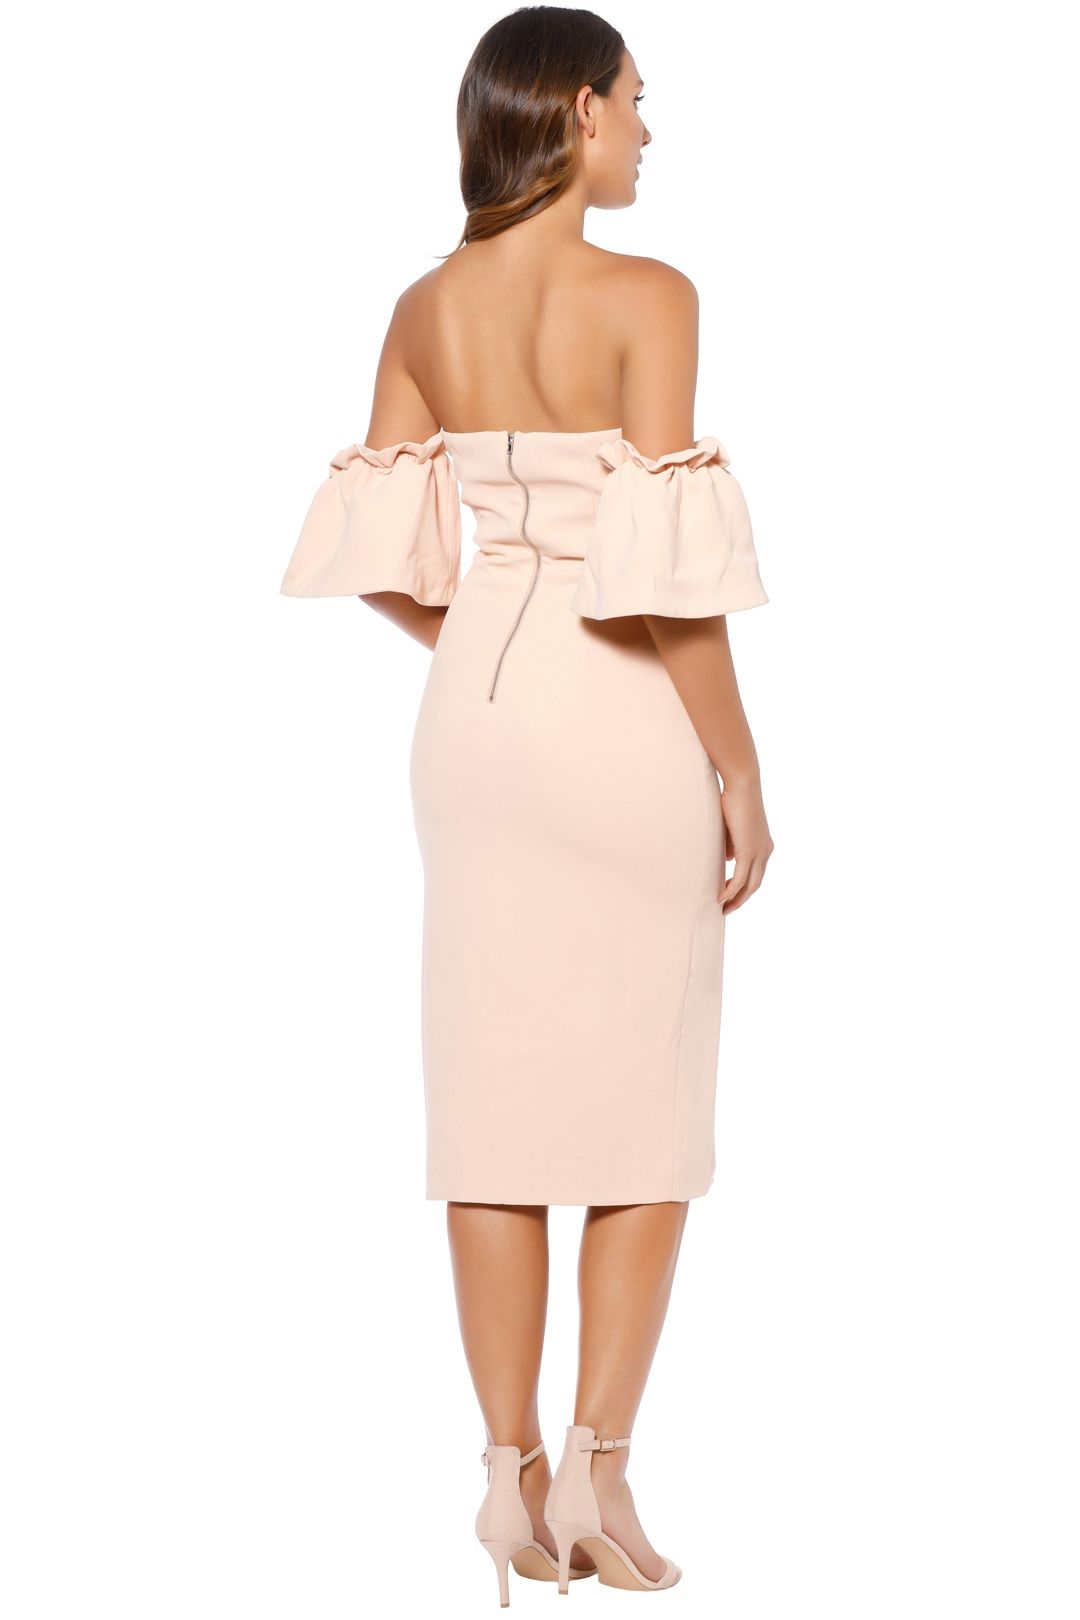 Bless'ed Are The Meek - Laia Dress - Shell - Front